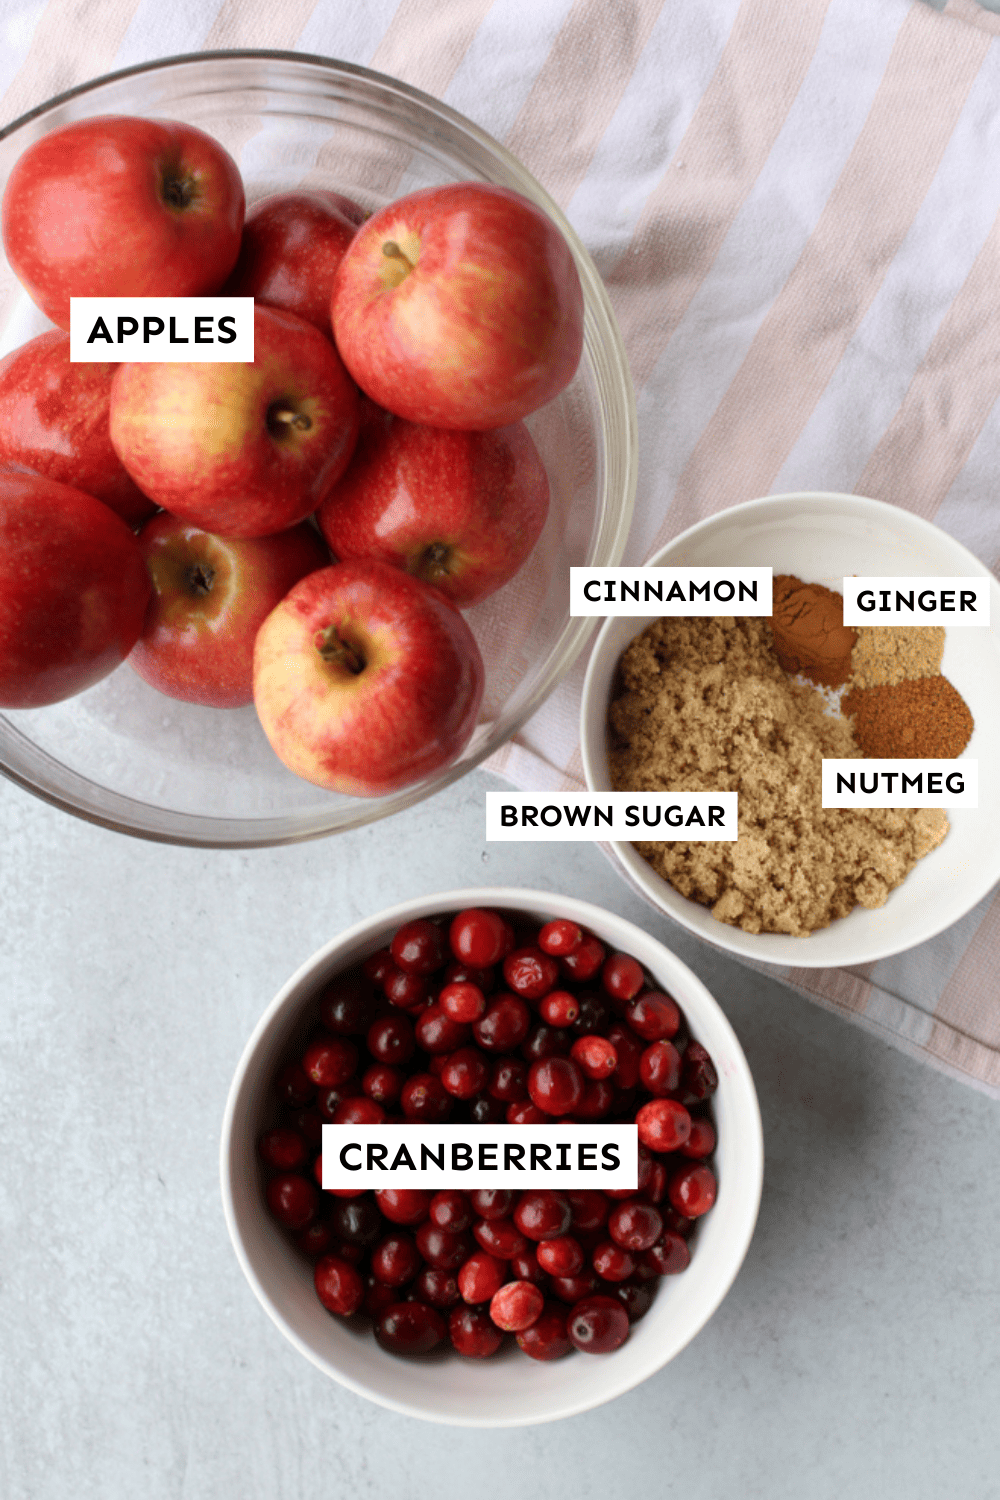 Ingredients for apple cranberry sauce measured and labeled.